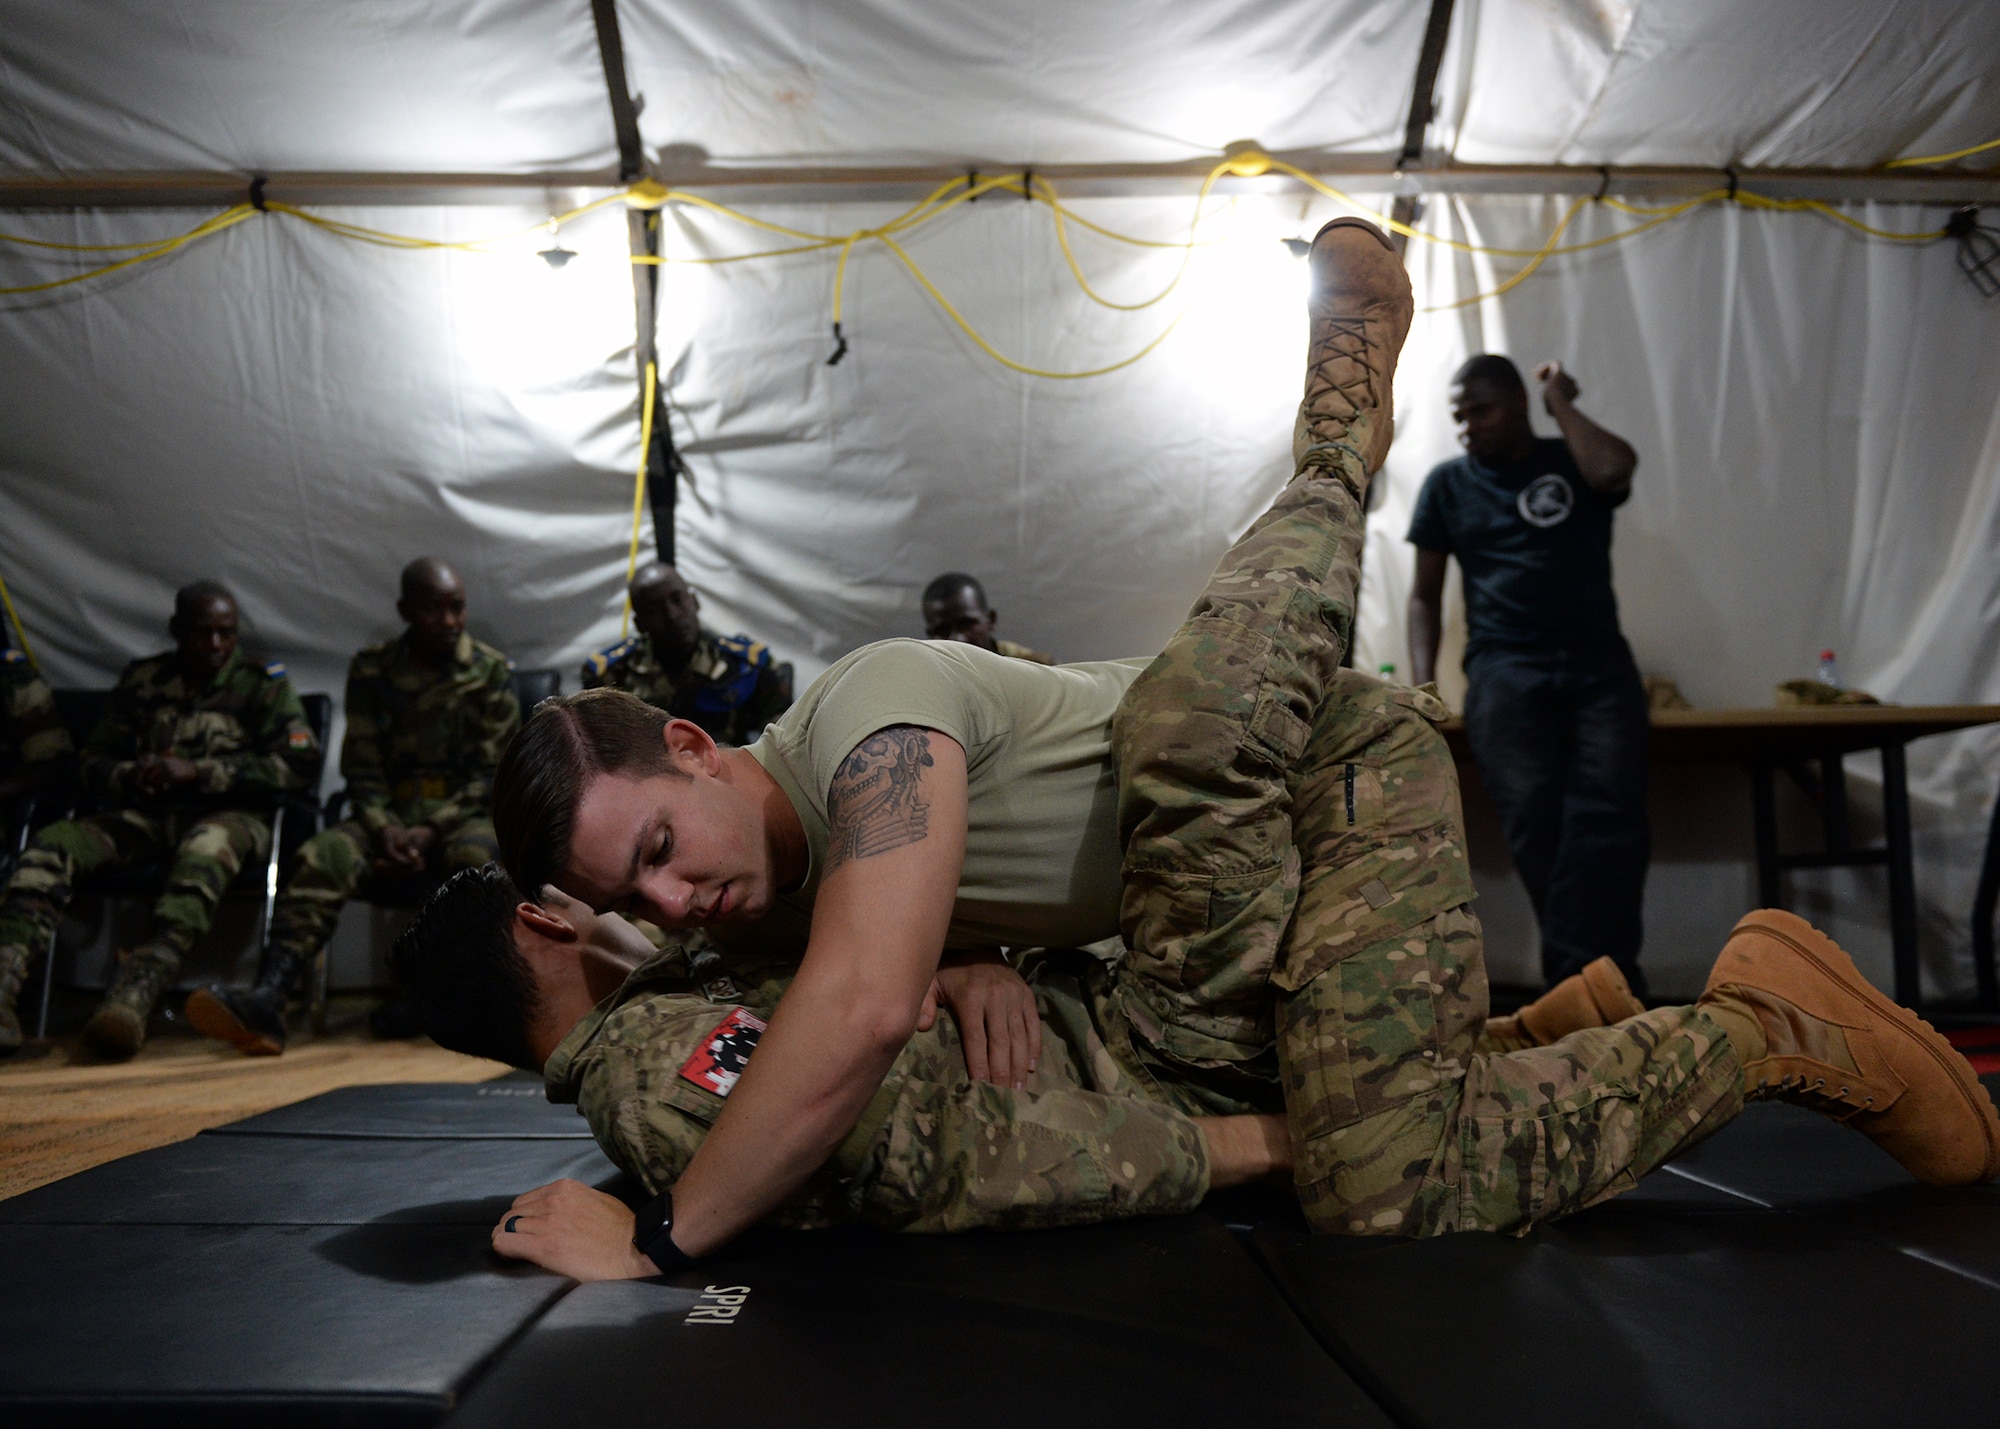 Senior Airmen Joshua Brooks and Jacob Myers, 768th Expeditionary Air Base Squadron air advisors, demonstrate a jiu jitsu maneuver to members of the Forces Armées Nigeriennes at Nigerien Air Base 101, Niger, April 4, 2017. The training was part of a larger joint knowledge exchange to help train and build relations with the FAN. (U.S. Air Force photo by Senior Airman Jimmie D. Pike)